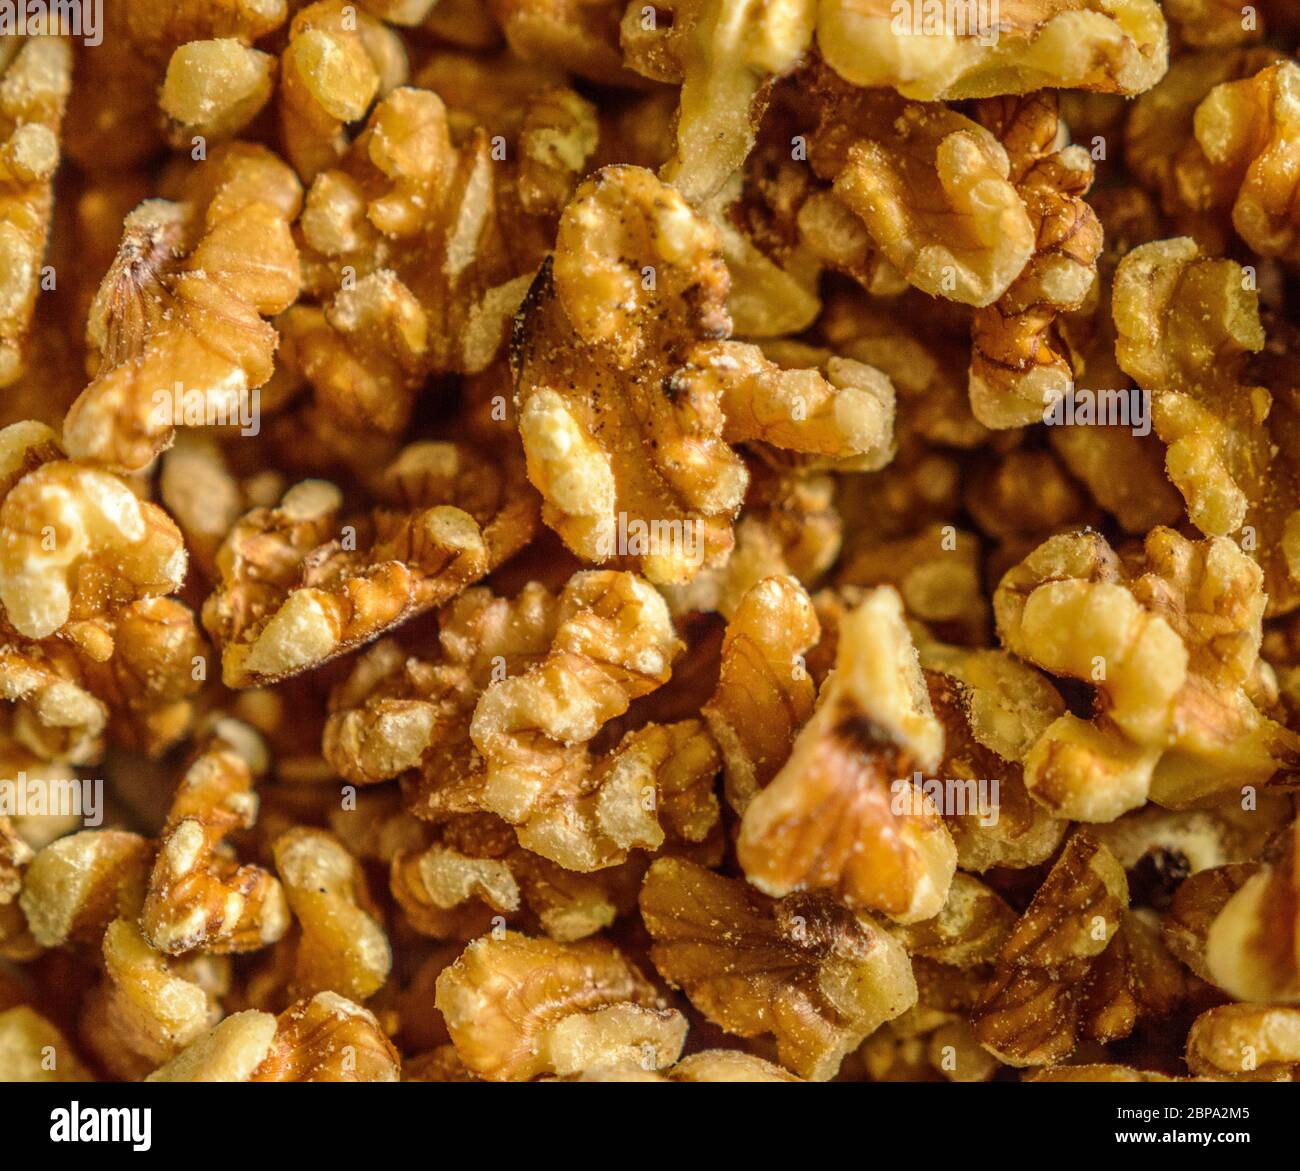 Display Fully Covered With California Peeled Nuts. Stock Photo